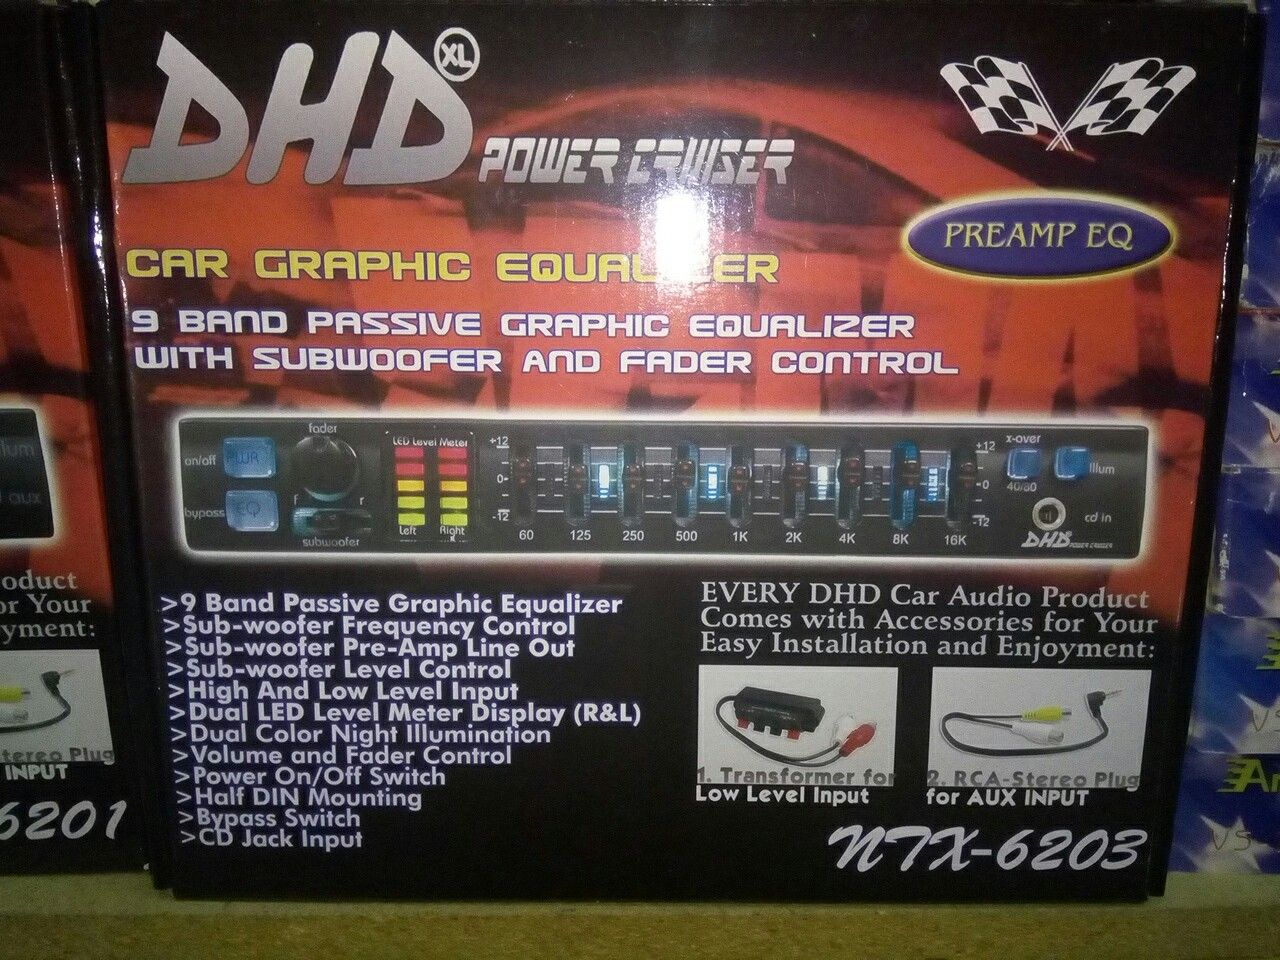 New car audio 9 band passive graphic equalizer